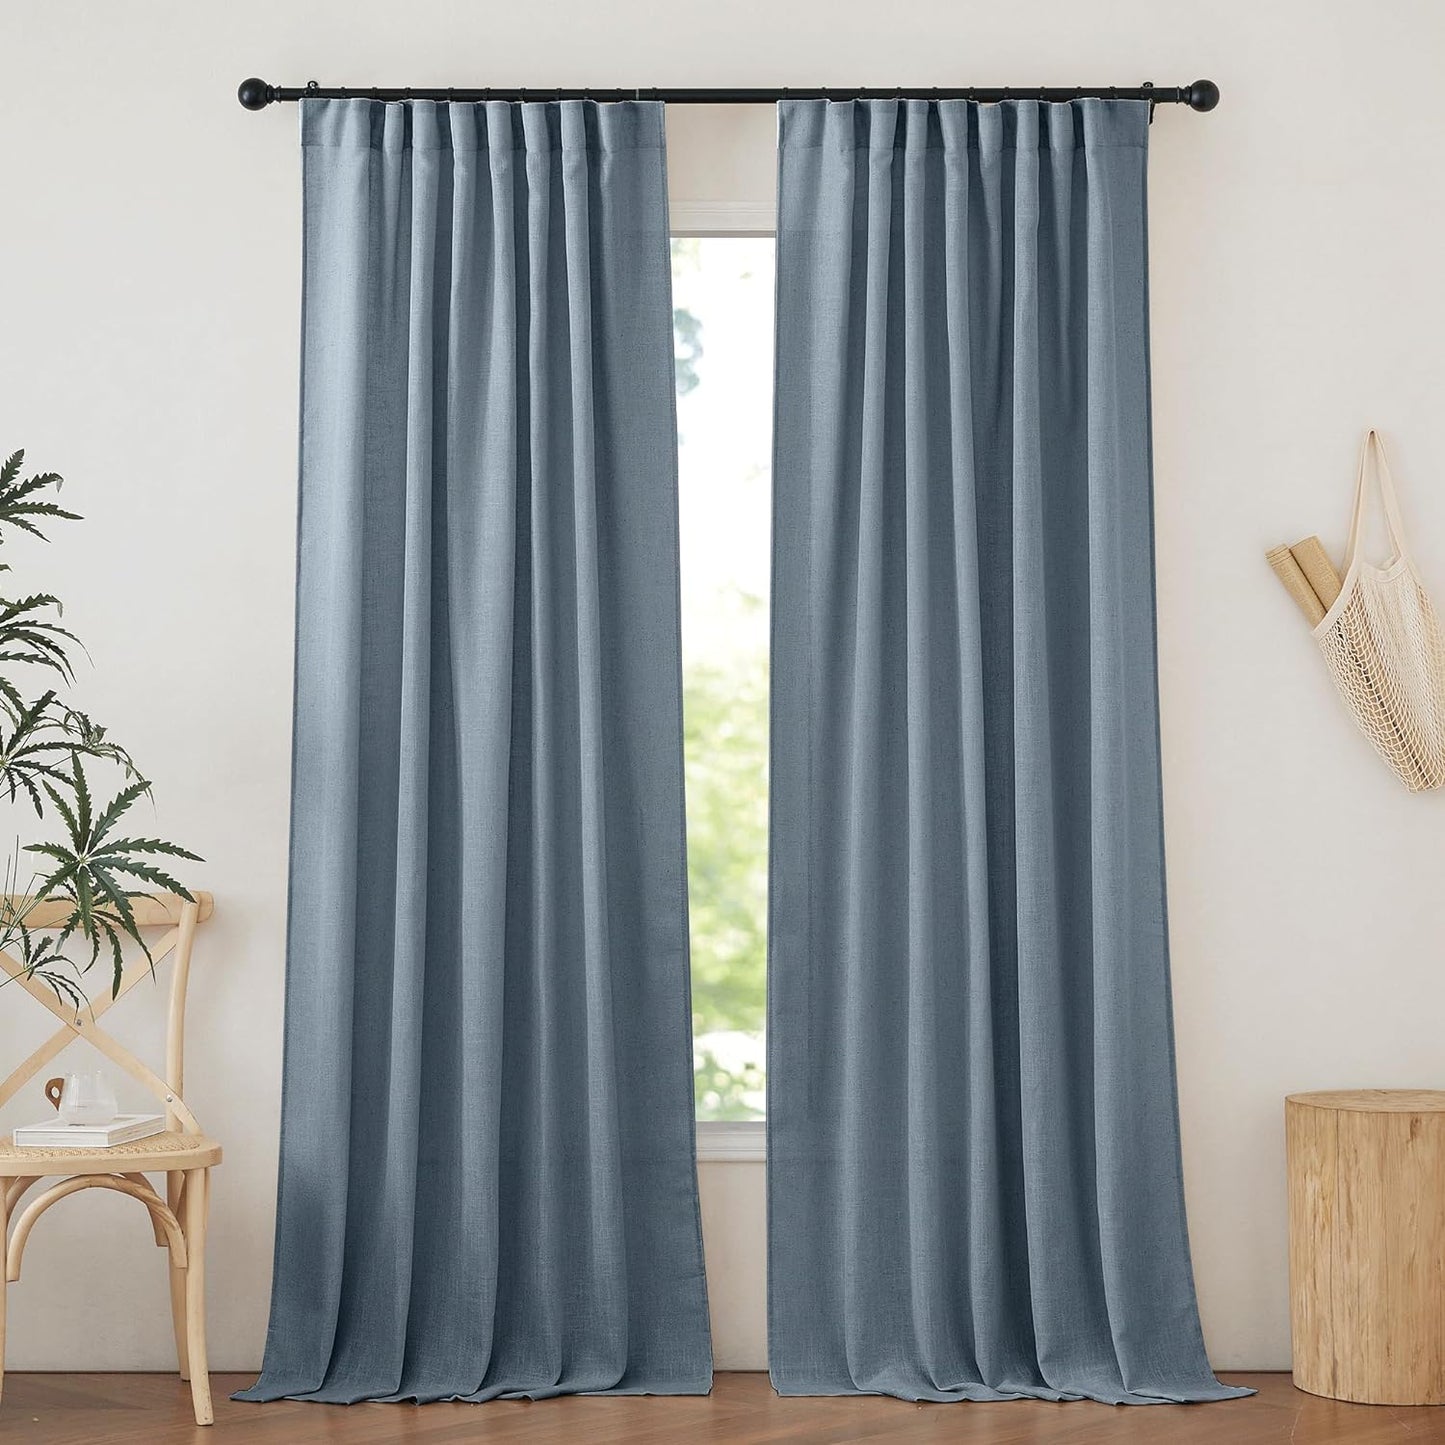 NICETOWN White Curtains Sheer - Semi Sheer Window Covering, Light & Airy Privacy Rod Pocket Back Tab Pinche Pleated Drapes for Bedroom Living Room Patio Glass Door, 52 X 63 Inches Long, Set of 2  NICETOWN Stone Blue W52 X L84 